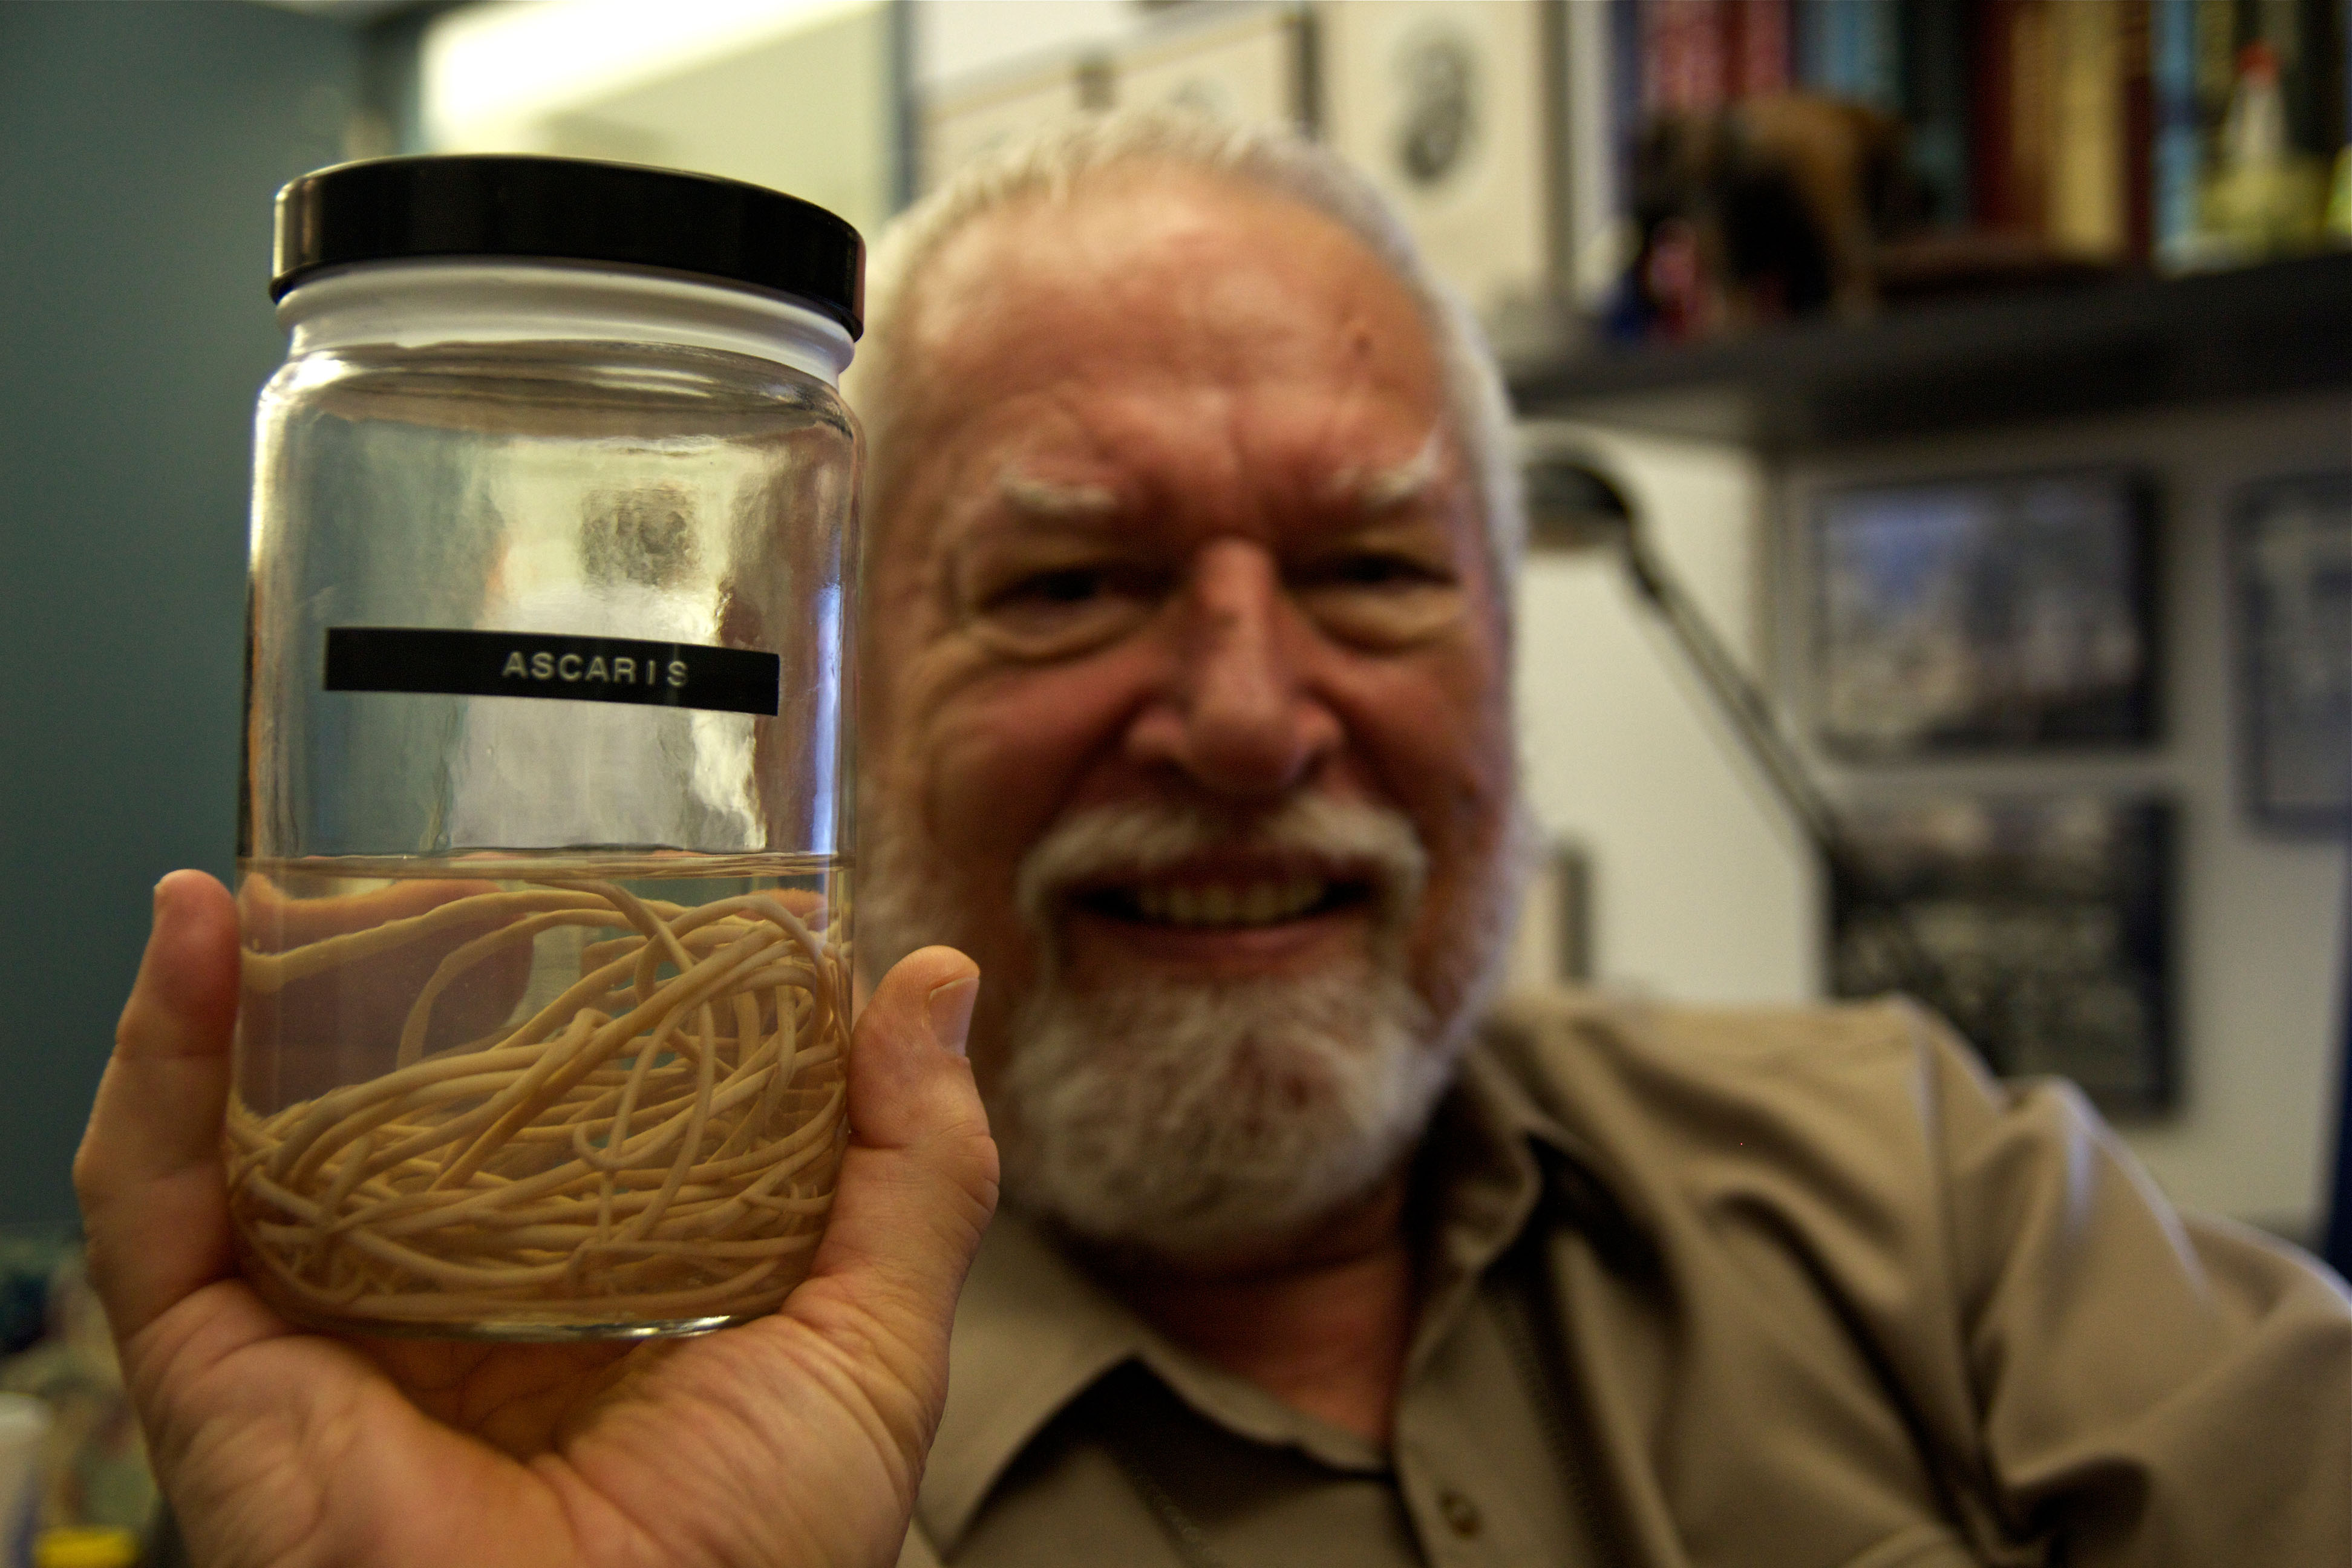 A scientistic with a beard holds a jar with ascaris parasite